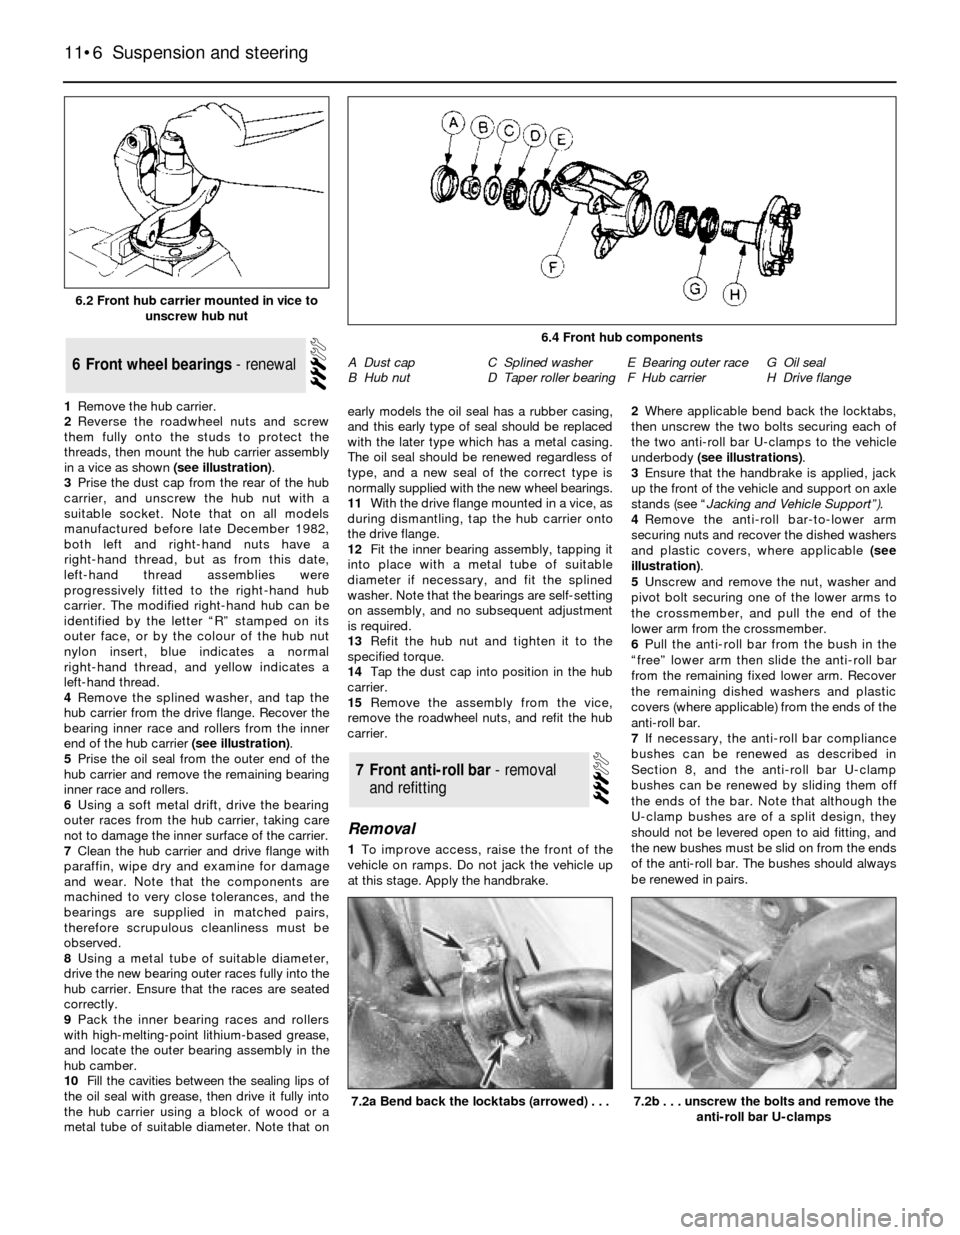 FORD SIERRA 1993 2.G Suspension And Steering Workshop Manual 1Remove the hub carrier.
2Reverse the roadwheel nuts and screw
them fully onto the studs to protect the
threads, then mount the hub carrier assembly
in a vice as shown (see illustration).
3Prise the d